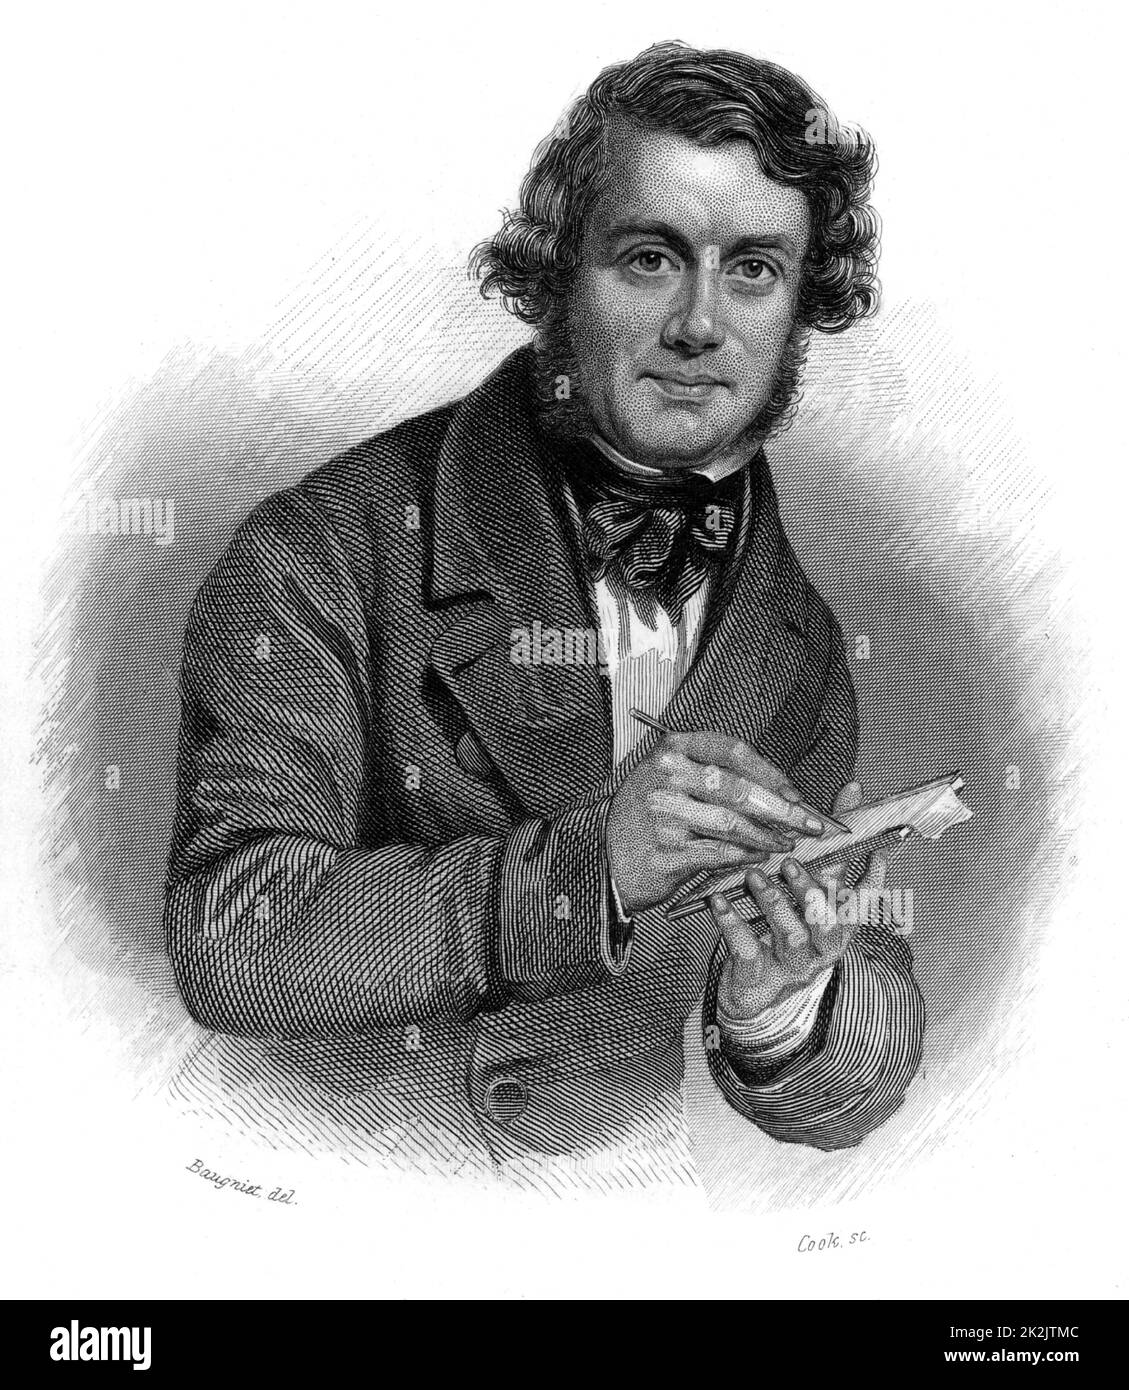 Alfred Crowquill (pseudonym of Alfred Henry Forrester 1804-1872) English writer and illustrator. A contributor to the early volumes of 'Punch'. Engraving, 1846. Stock Photo